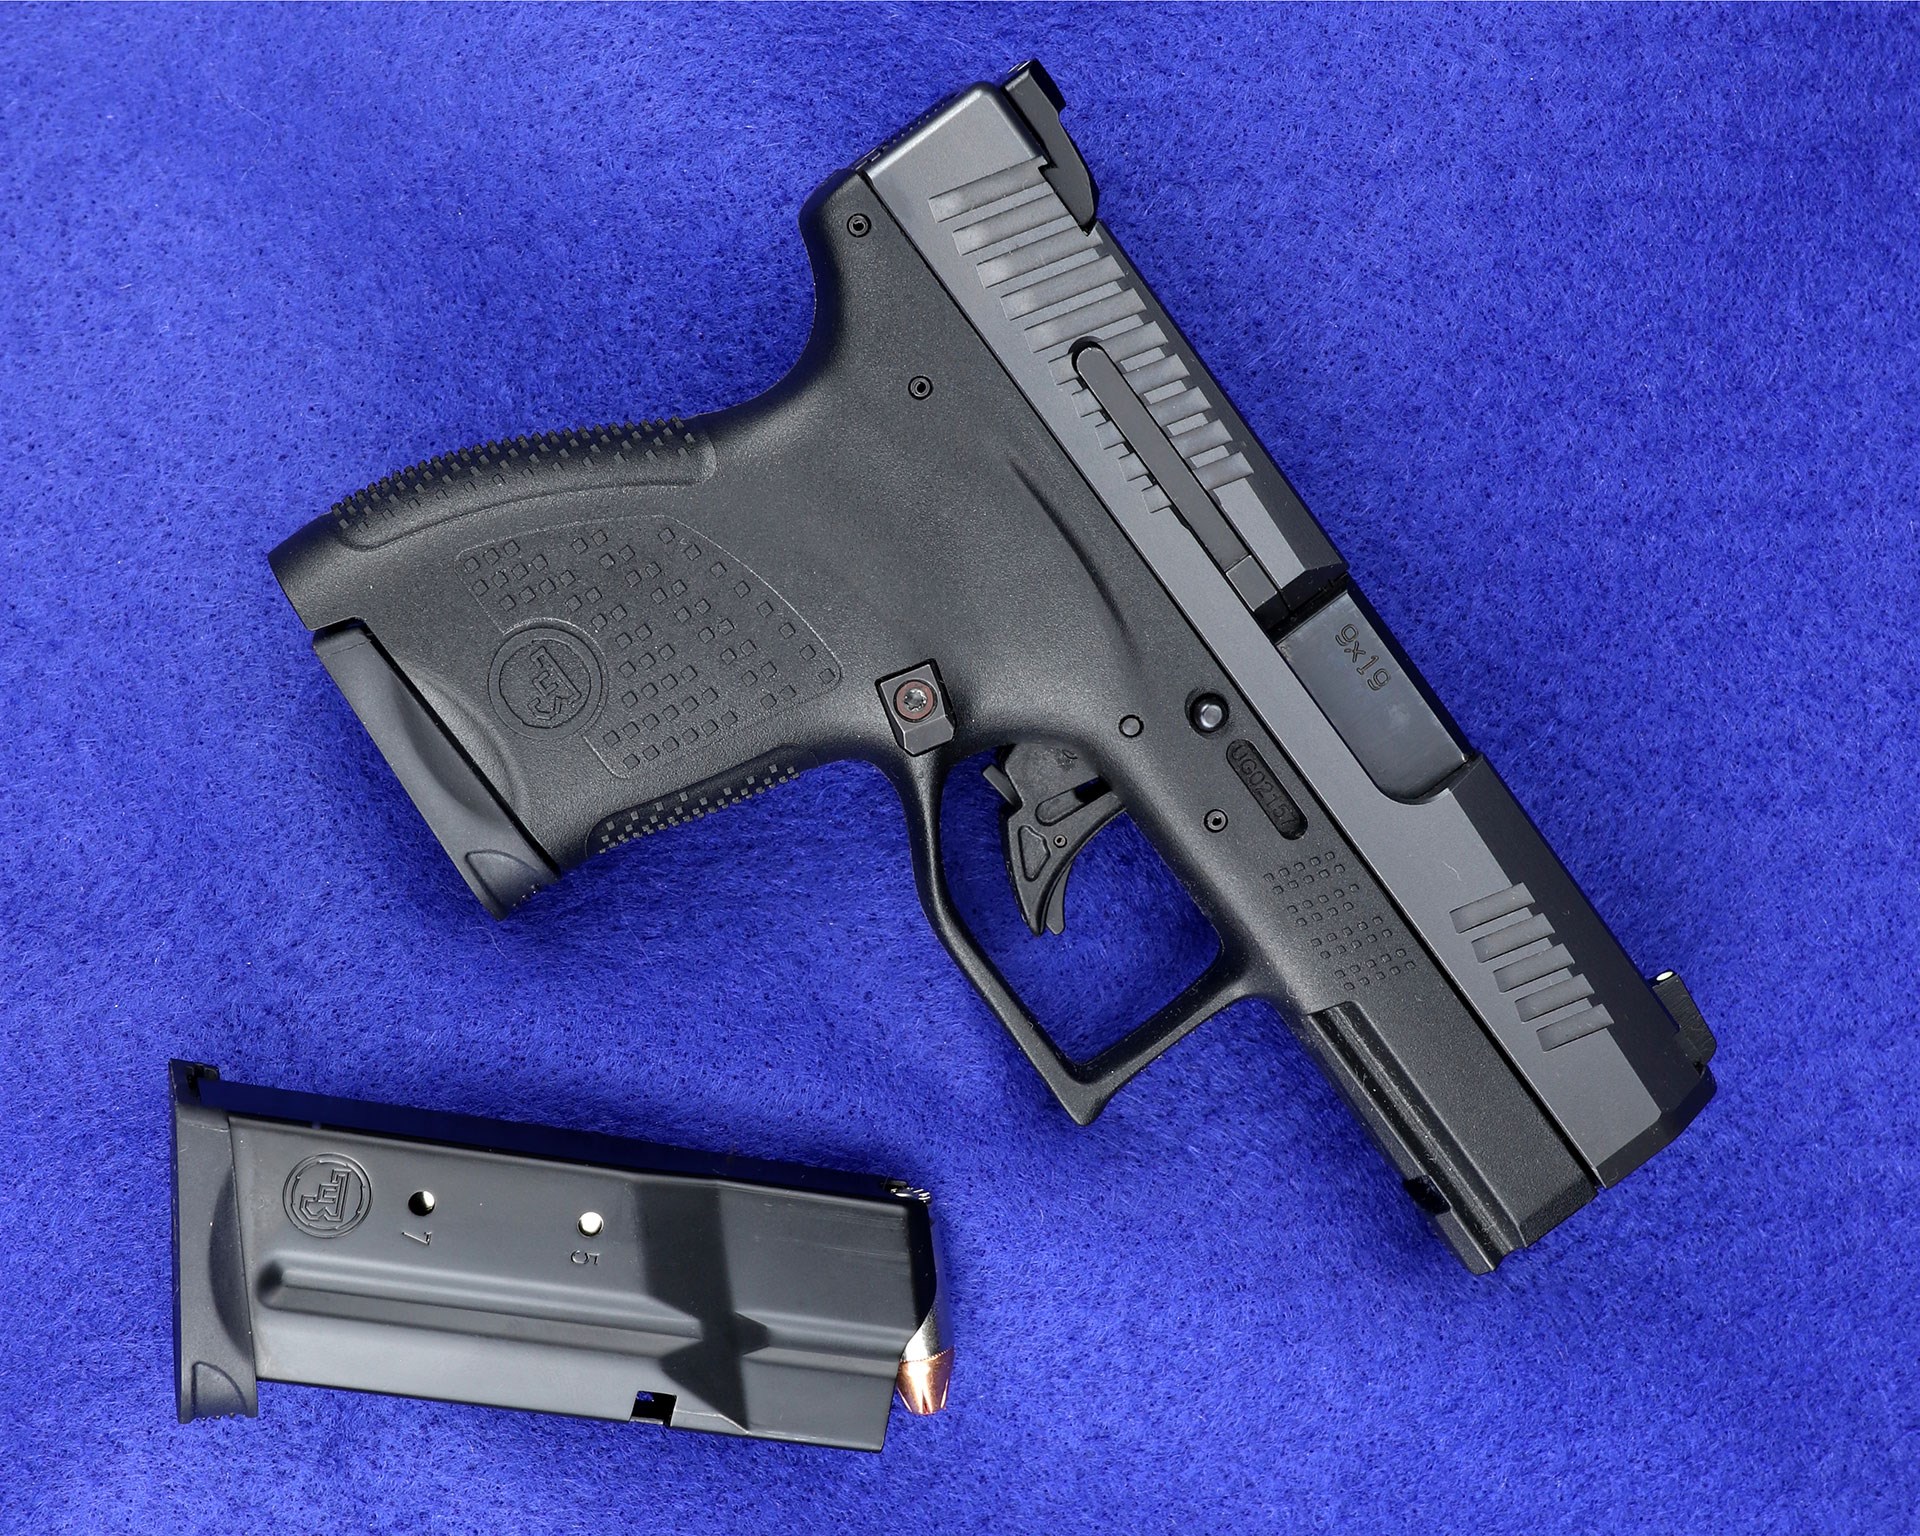 CZ P-10 M black 9 mm handgun with blue background and magazine removed.